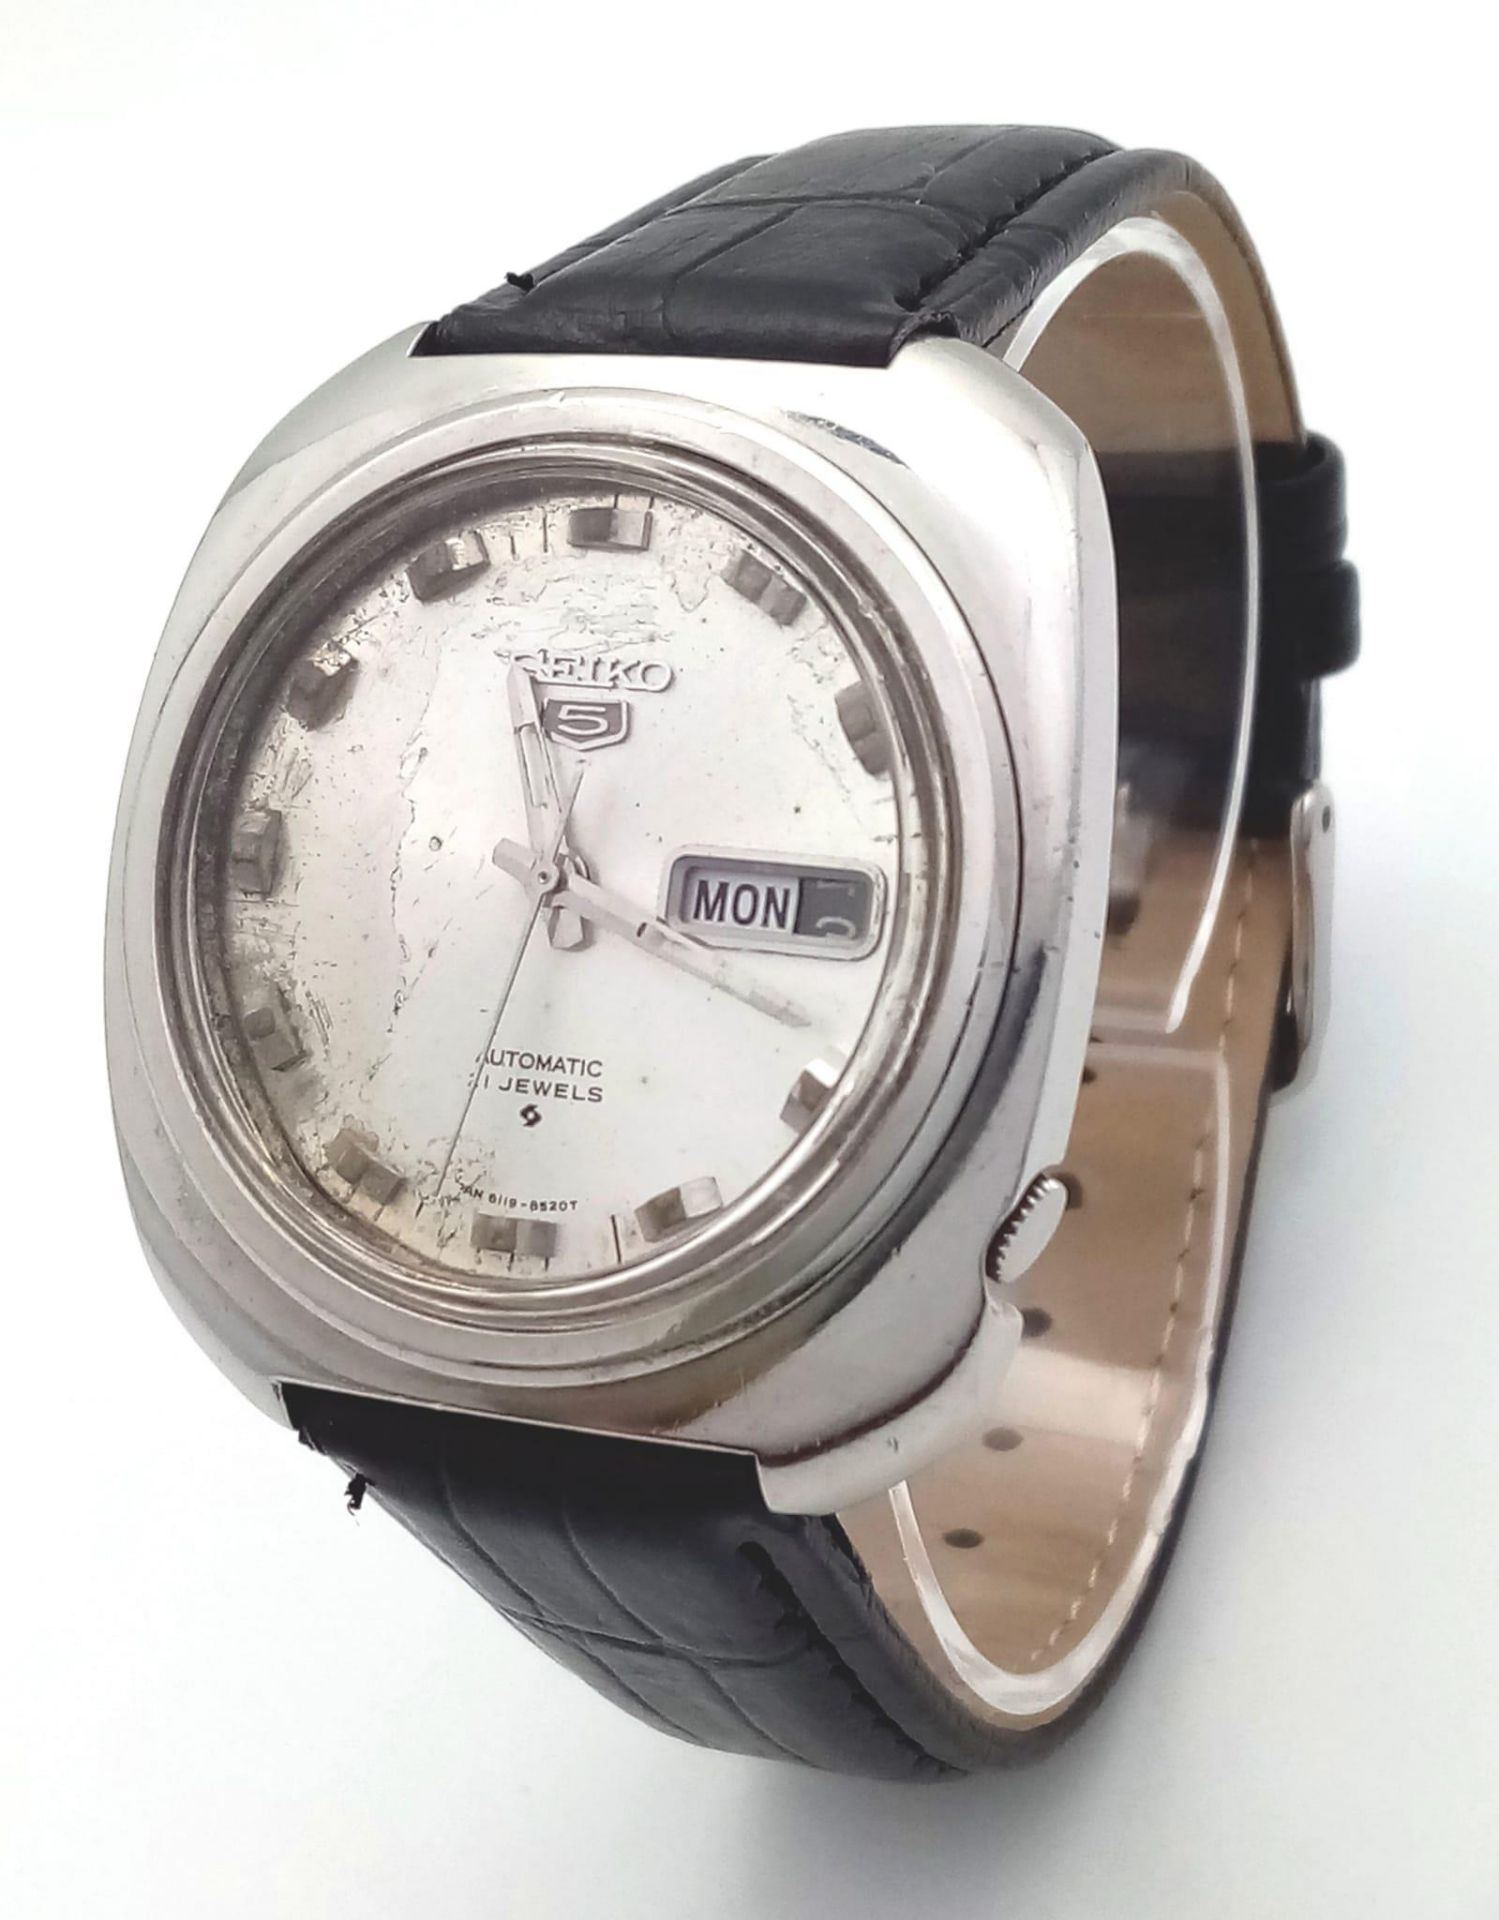 A Vintage Seiko 5 Automatic Gents Watch. Black leather strap. Stainless steel case - 38mm. Silver